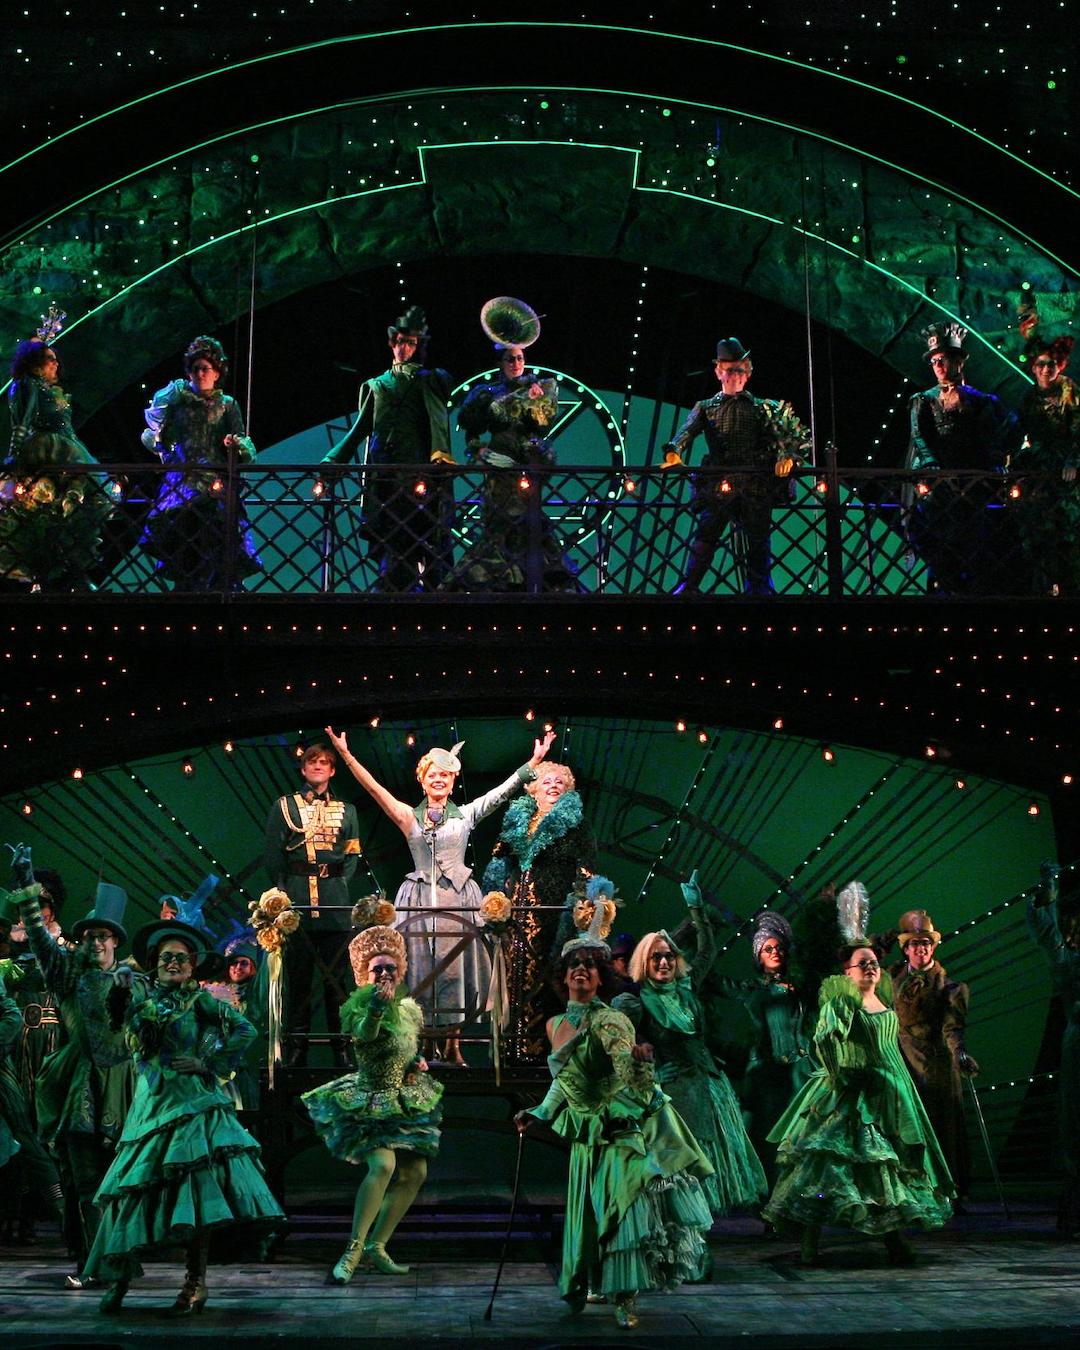 WICKED The Musical